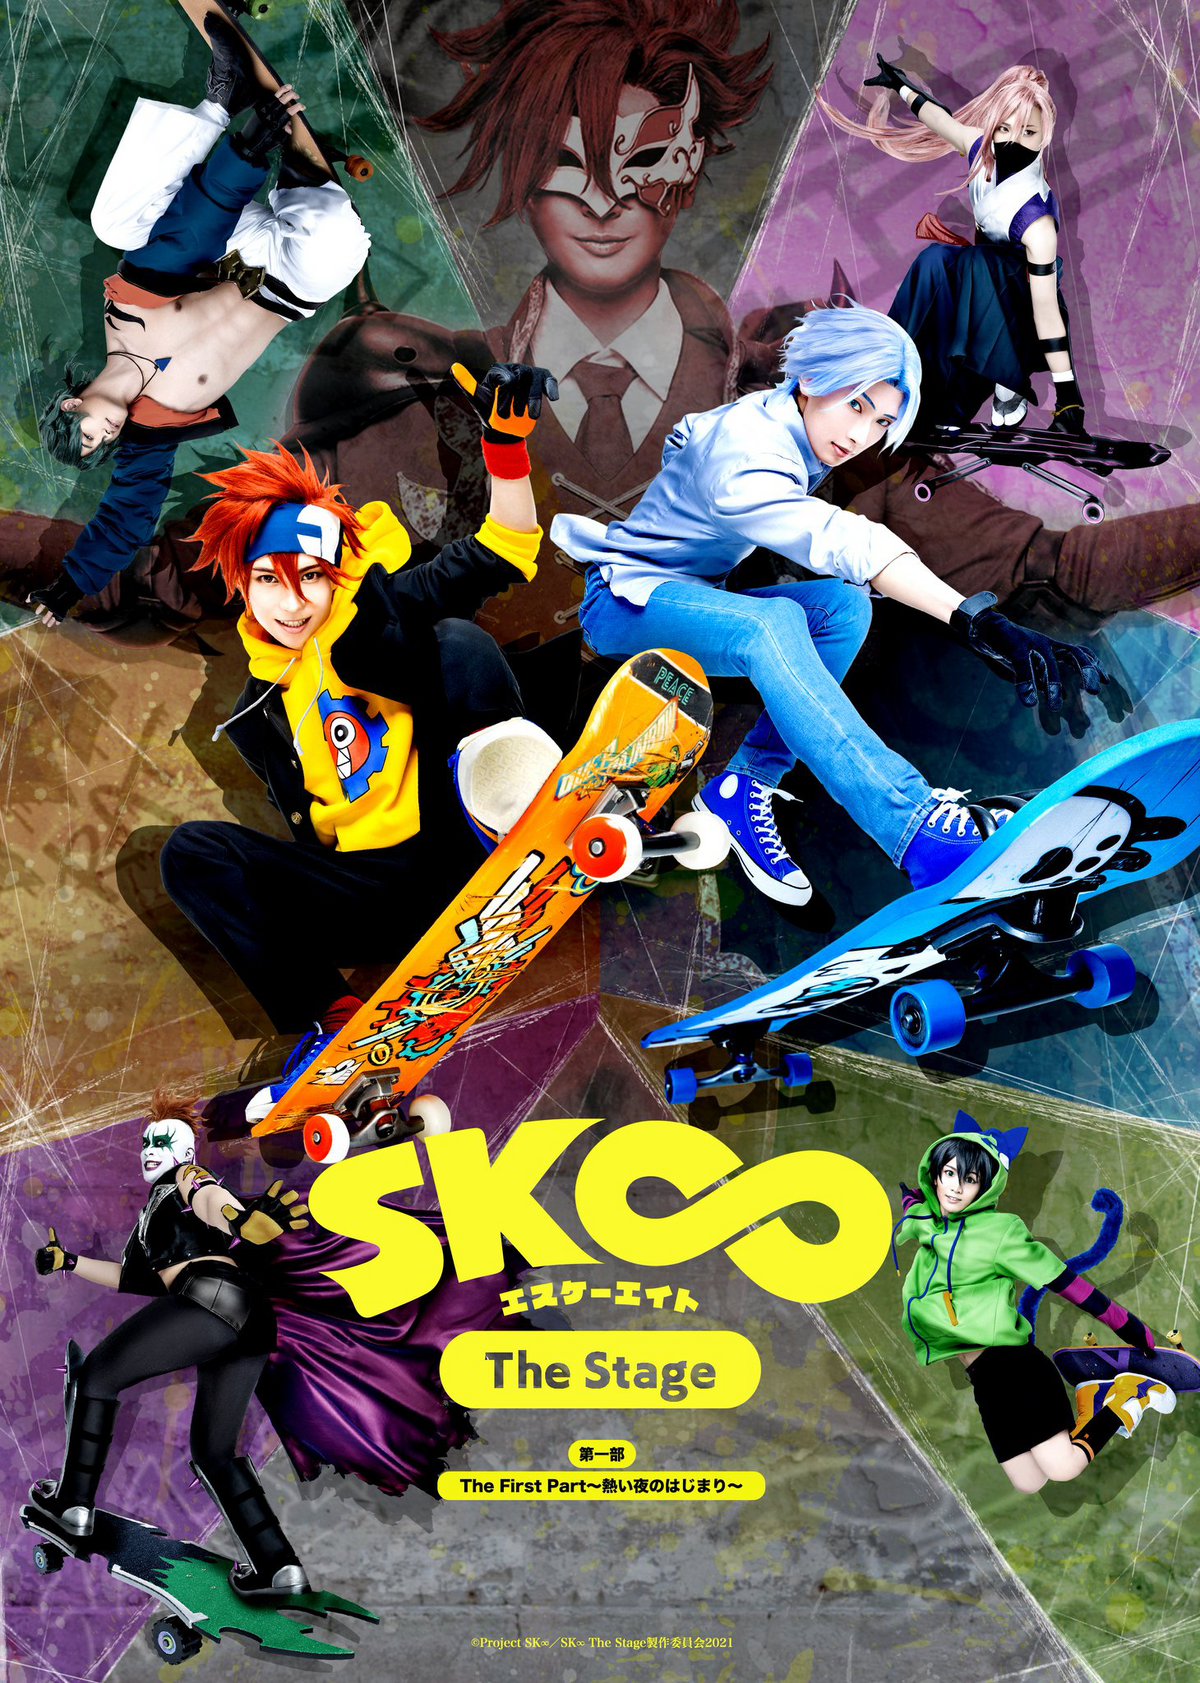 SK8 The Infinity Season 2 Release Date & Latest Details 